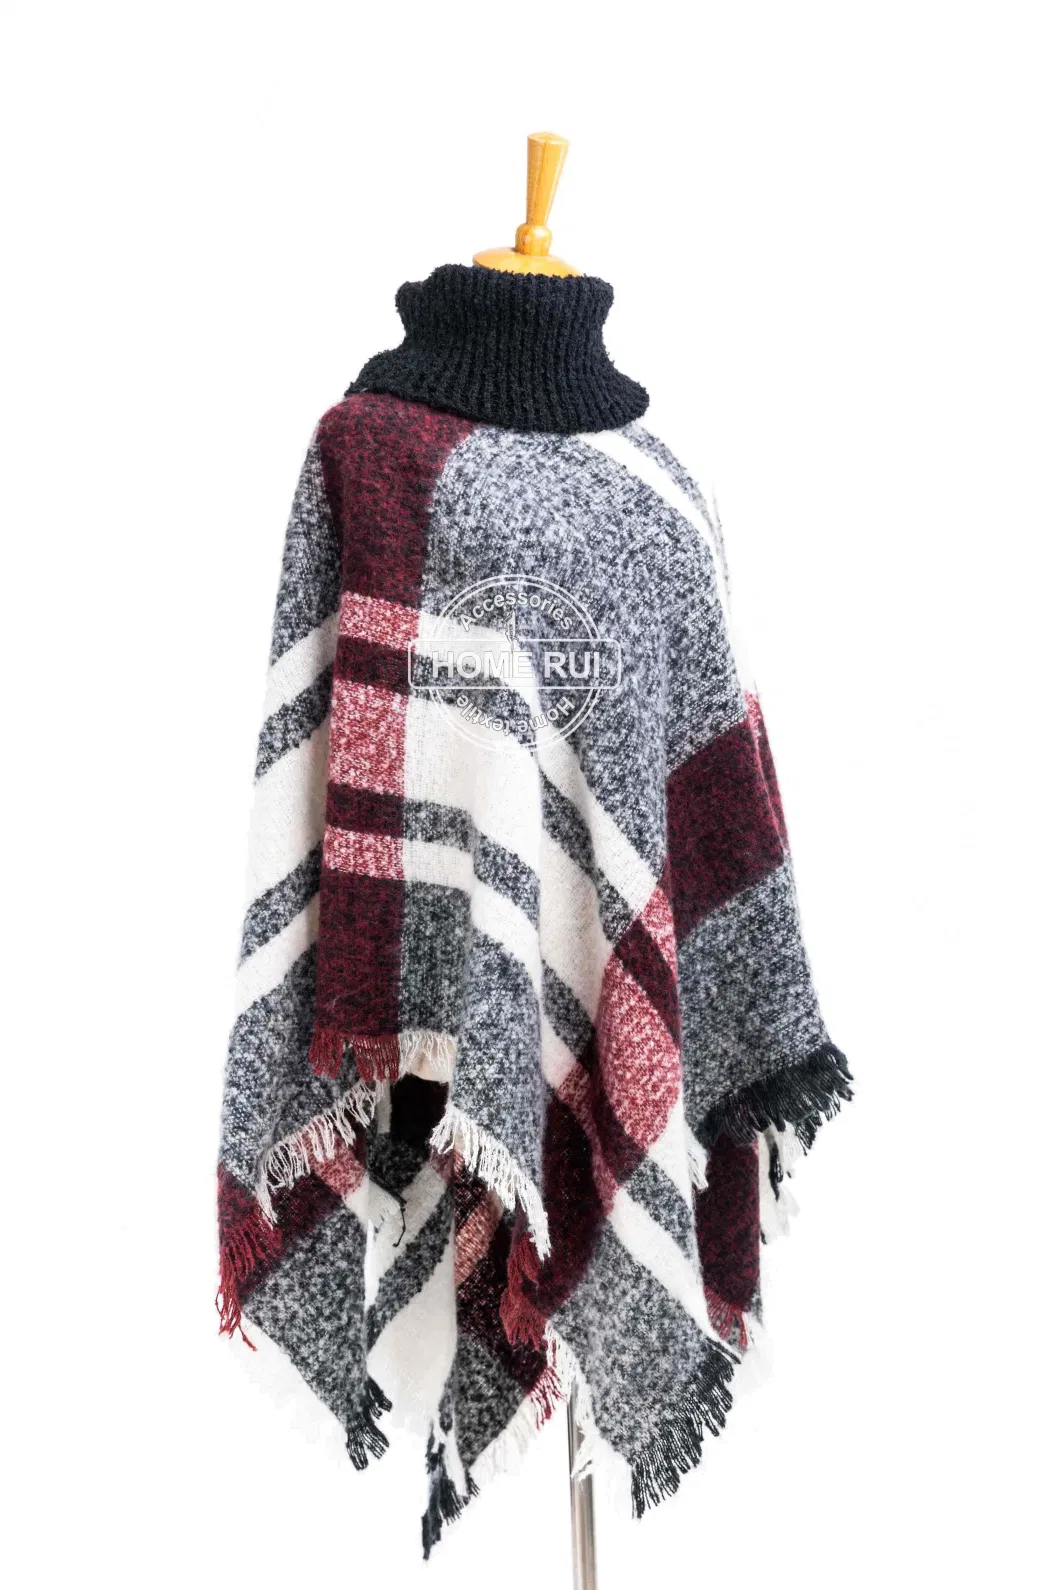 Spring Autumn Woman Lady Warm Fashion Woven Polyester Boucle Yarn Brushed Black Mixed Colour Fringe Pullover Wraps Grids Plaid Checks Shawl Turtleneck Poncho